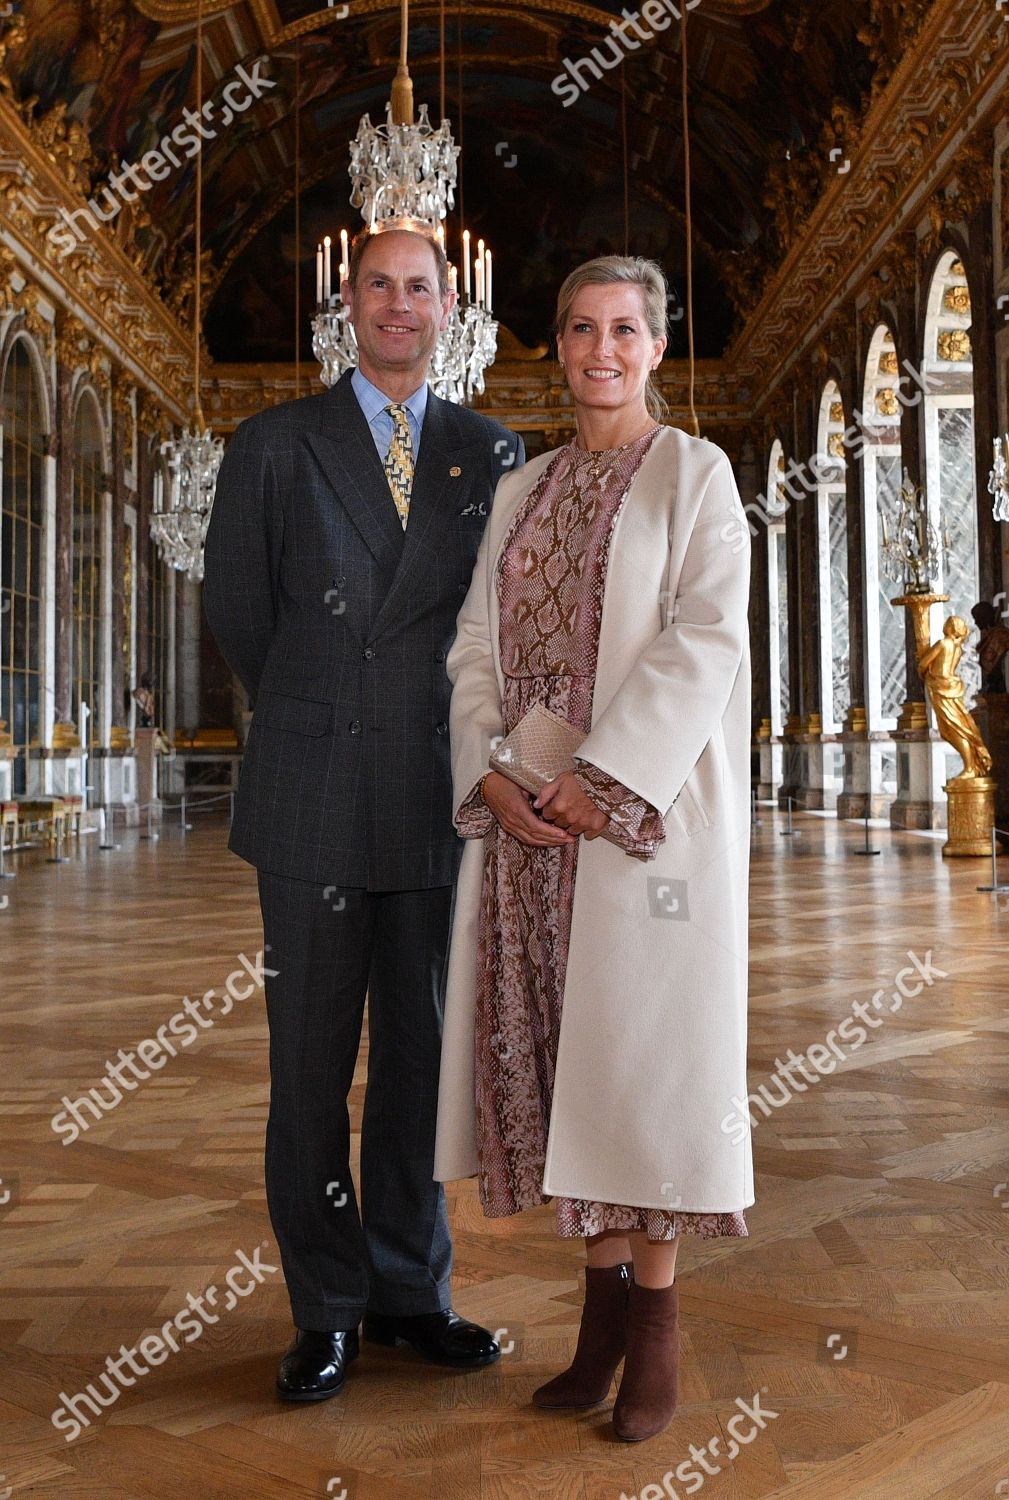 prince-edward-and-sophie-countess-of-wessex-visit-to-paris-france-shutterstock-editorial-9907868ad.jpg